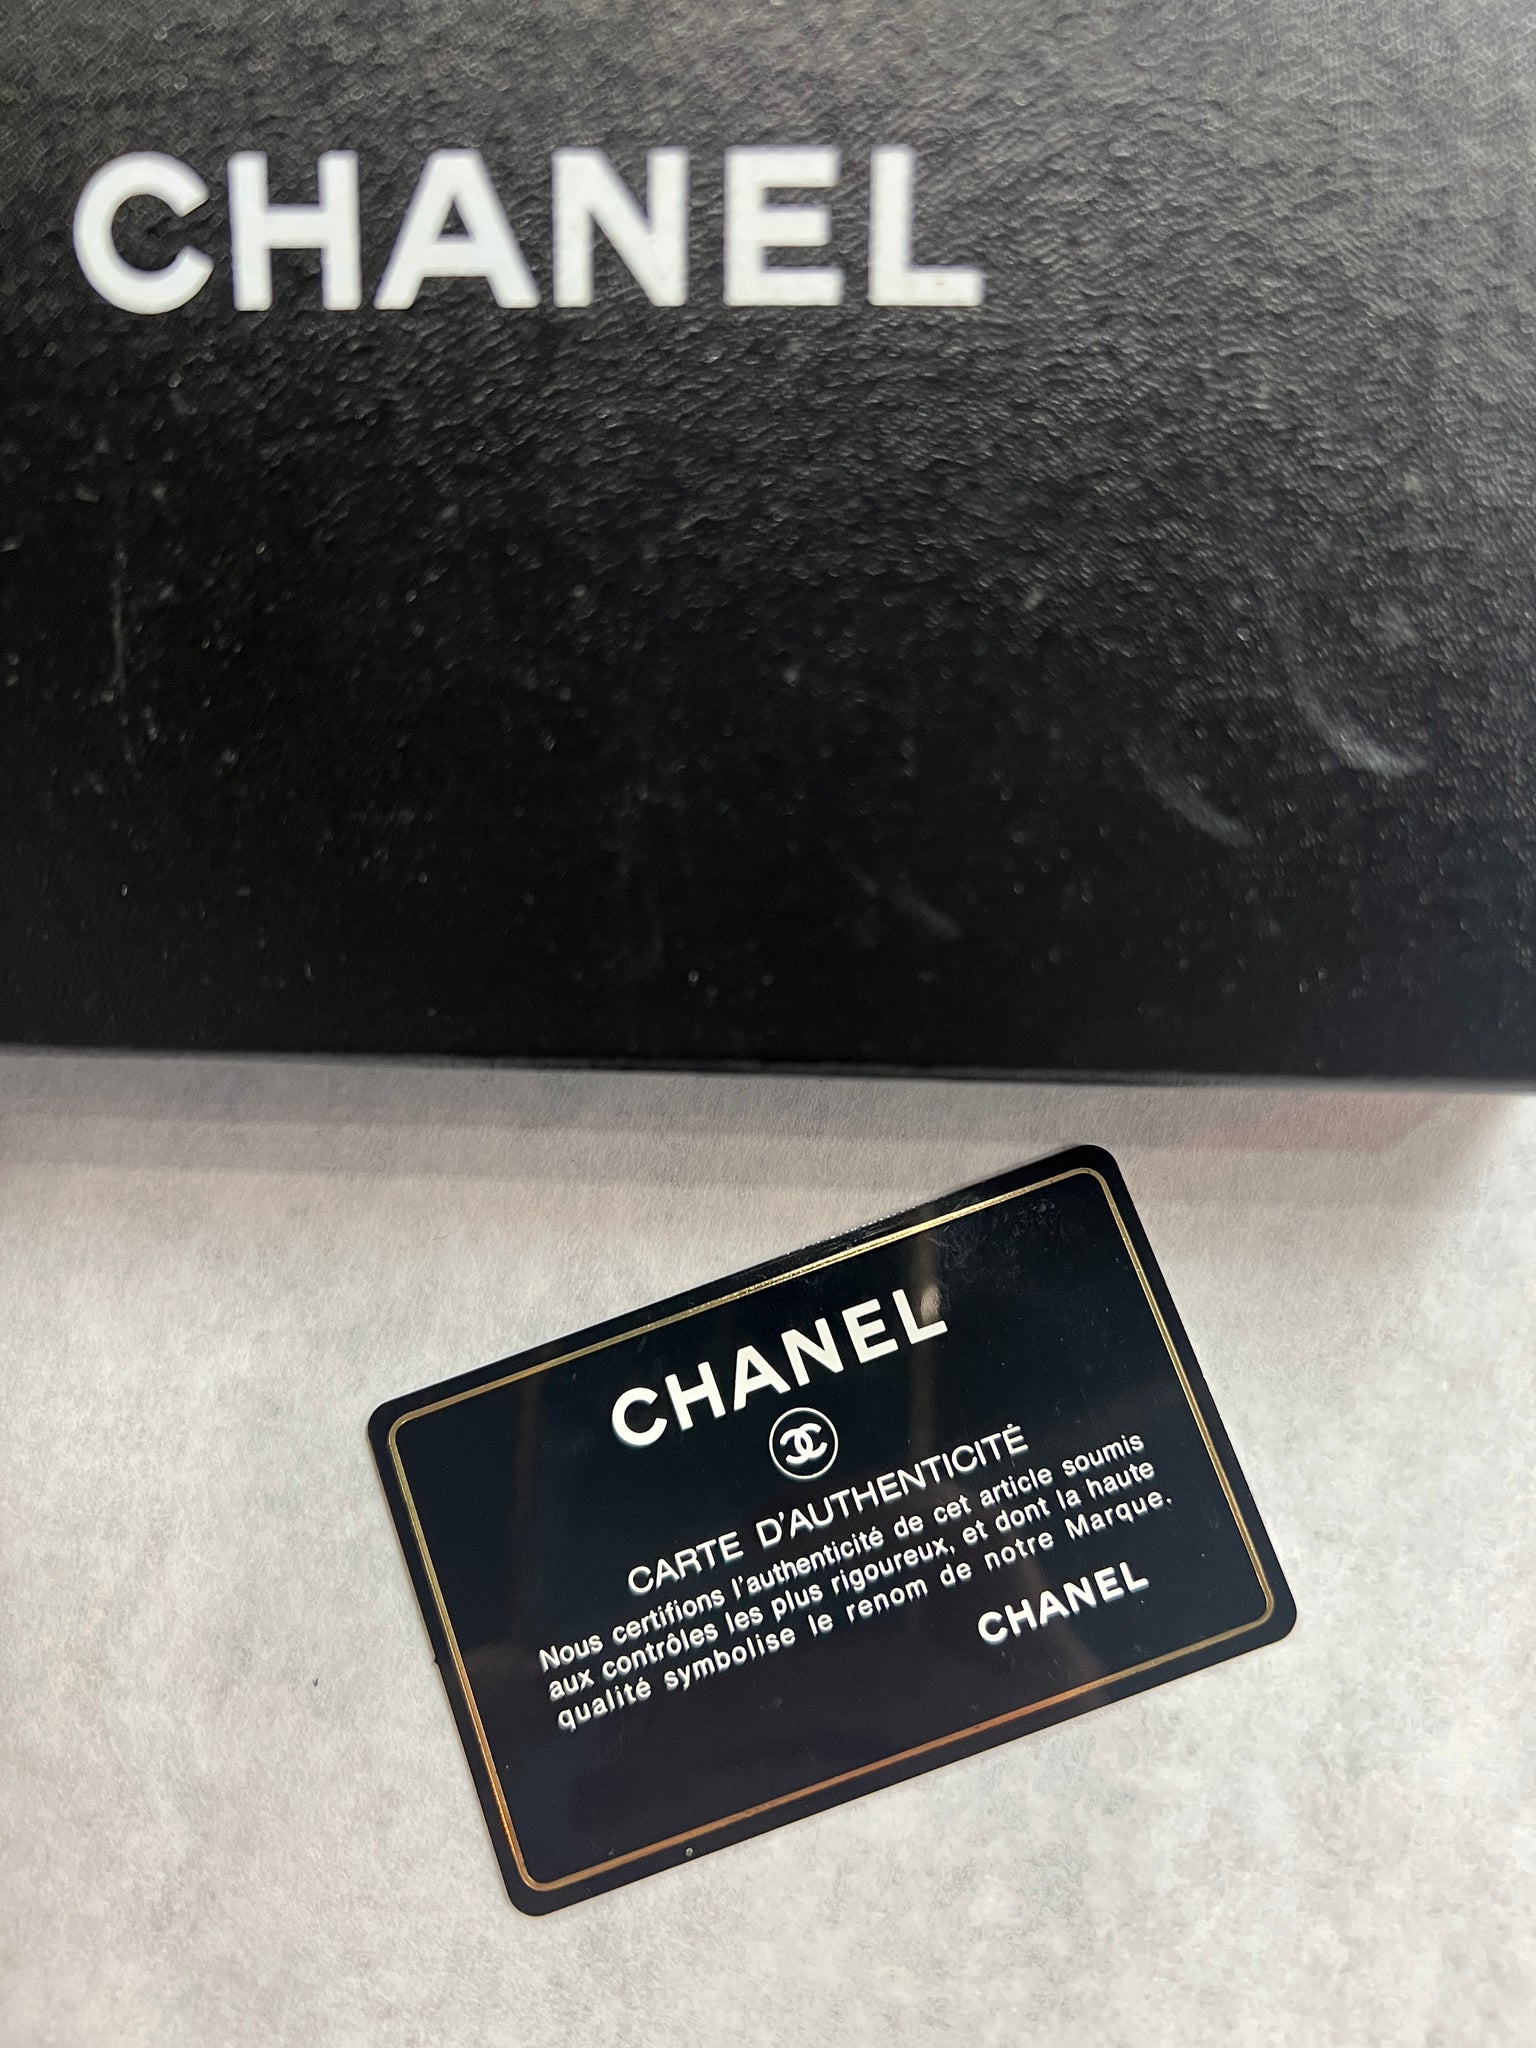 Chanel authenticity card